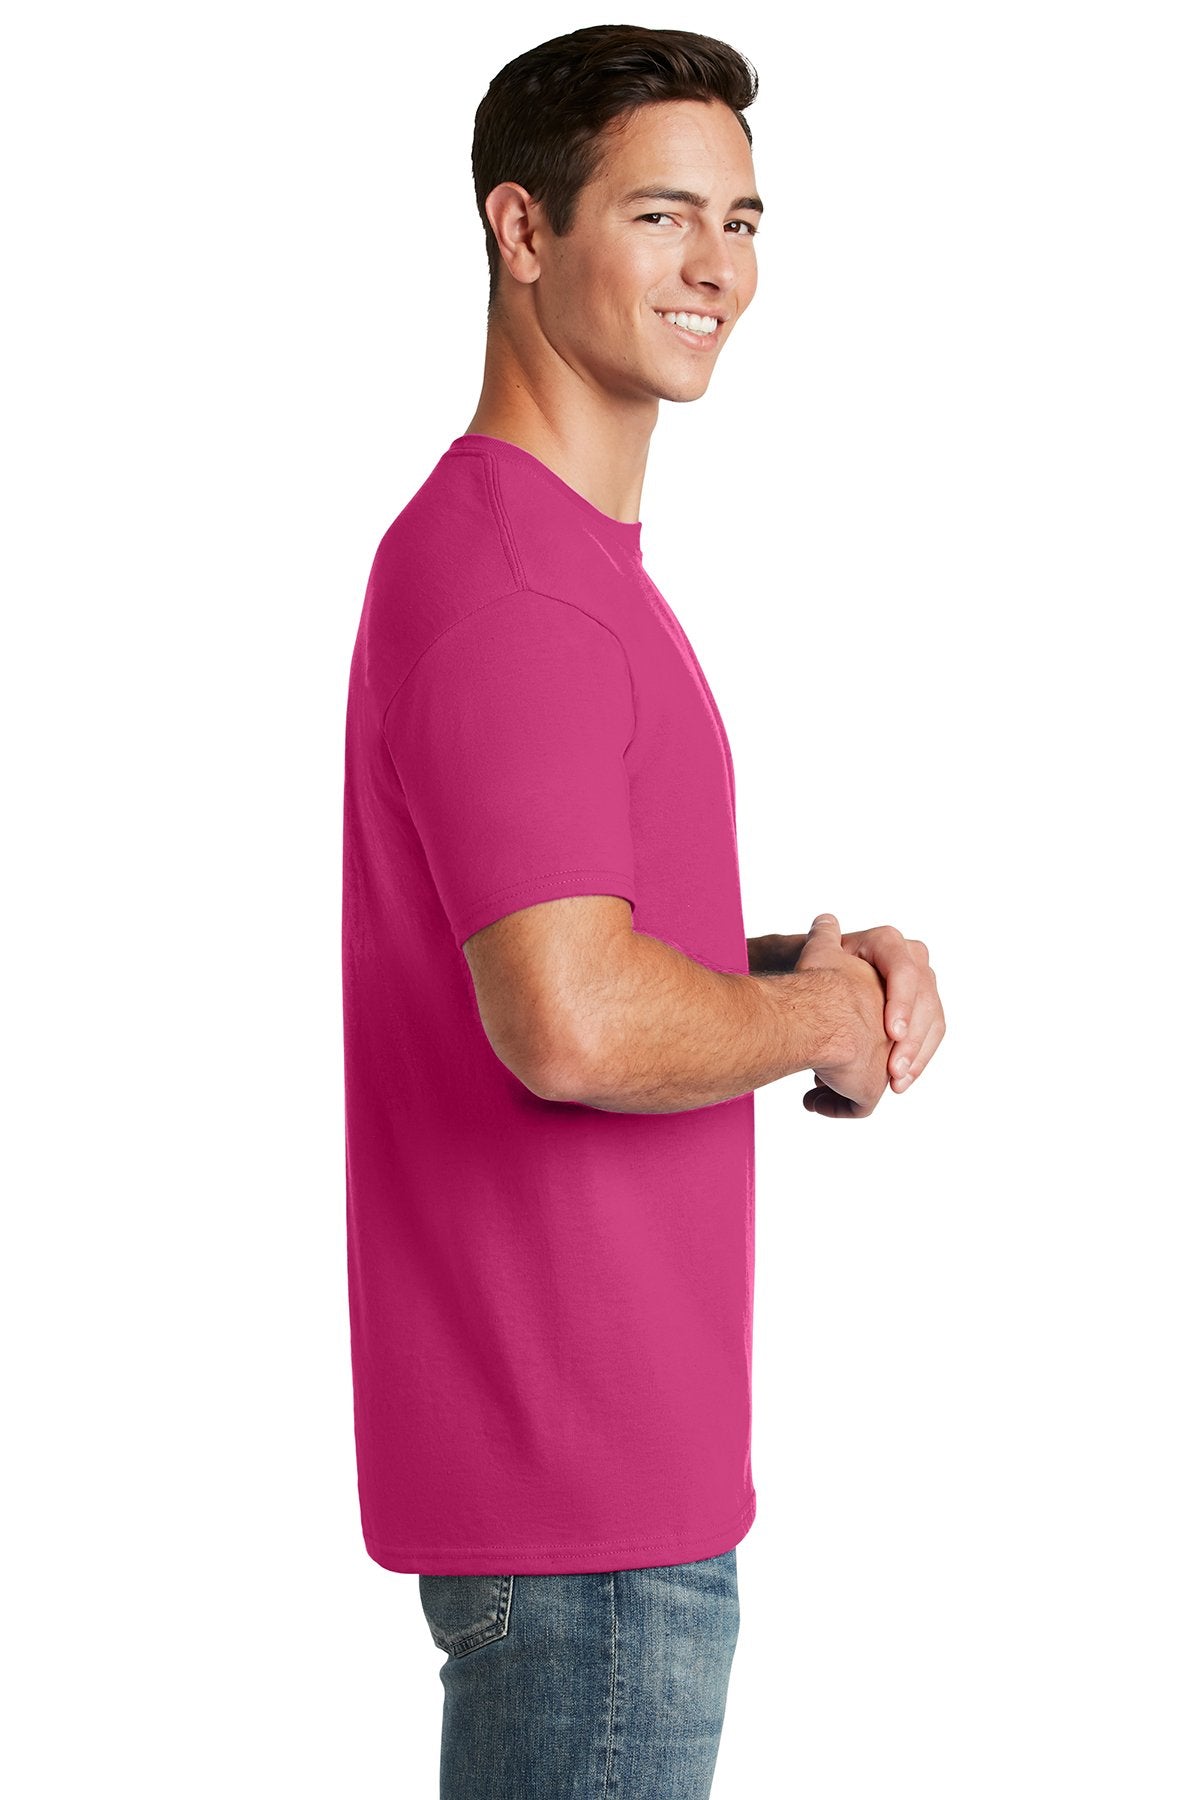 Jerzees Dri-Power Active 50/50 Cotton/Poly T-Shirt 29M Cyber Pink